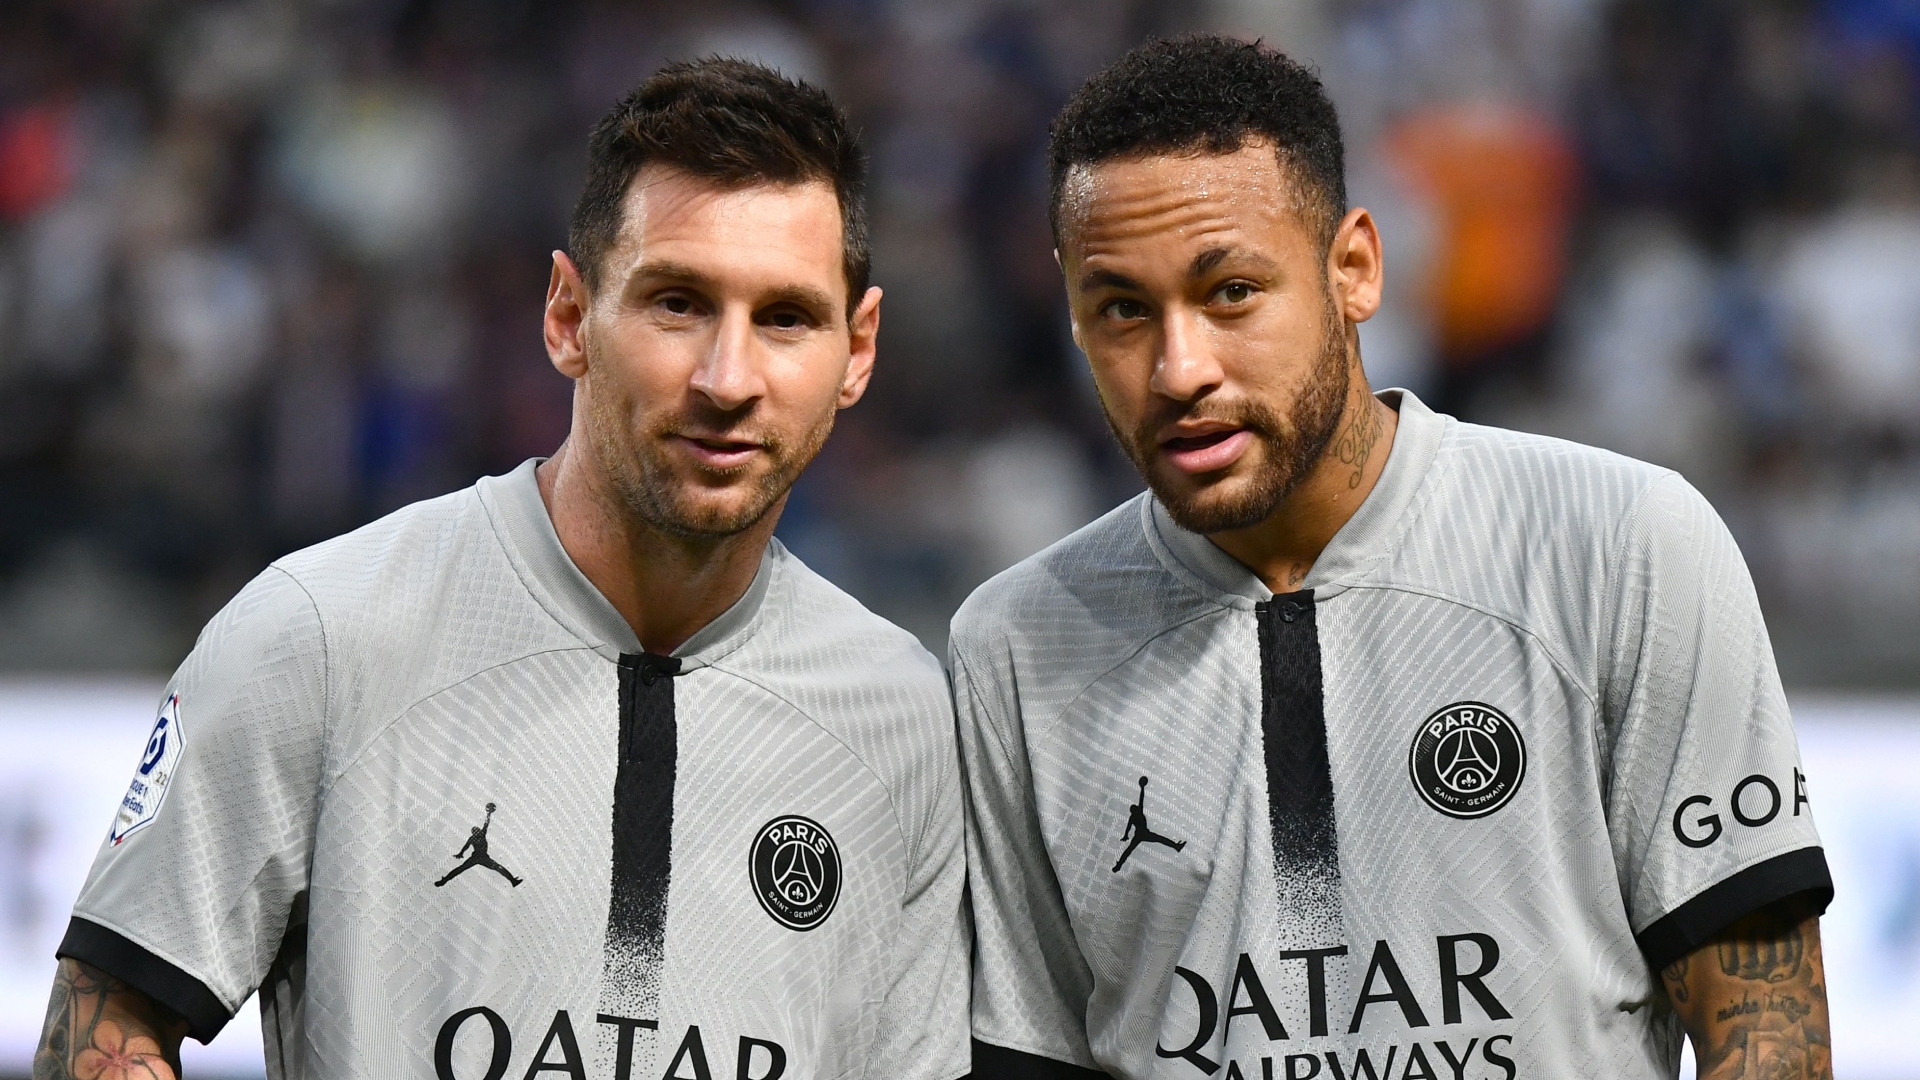 Neymar Sees Messi 'improving' At PSG After 'difficult' 11 Goal Debut Season